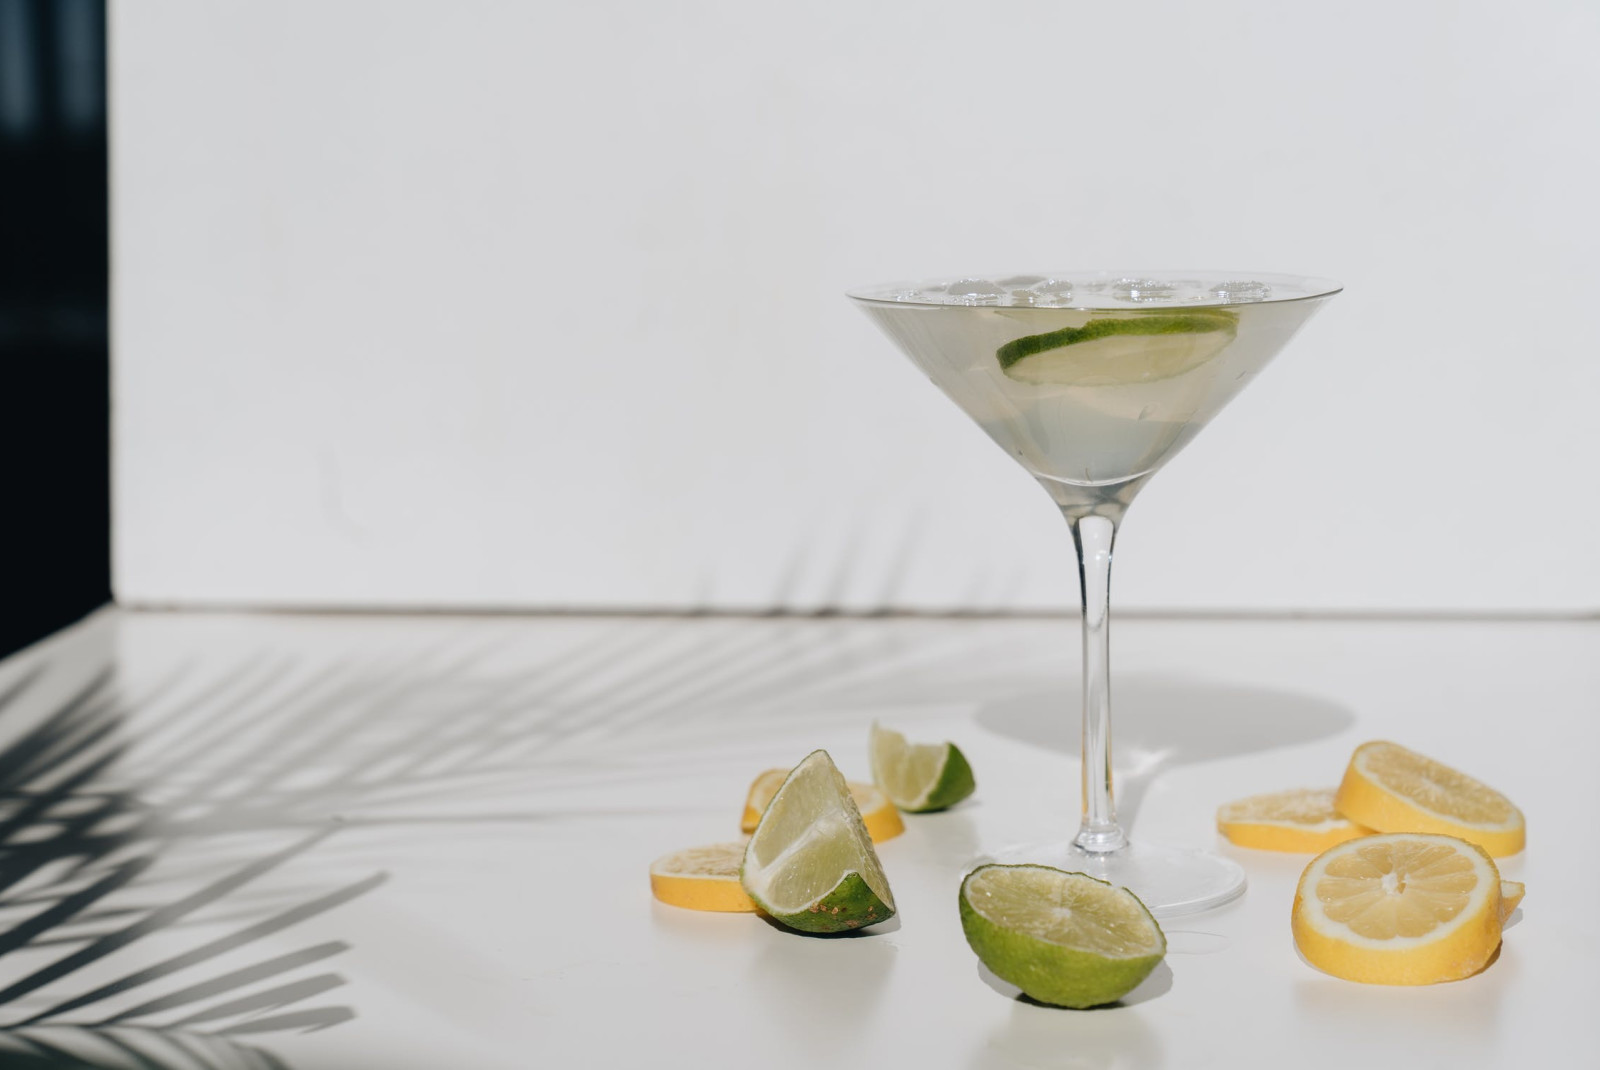 margarita in clear glass with lemons and limes on a white table with palm leaves in the shadow